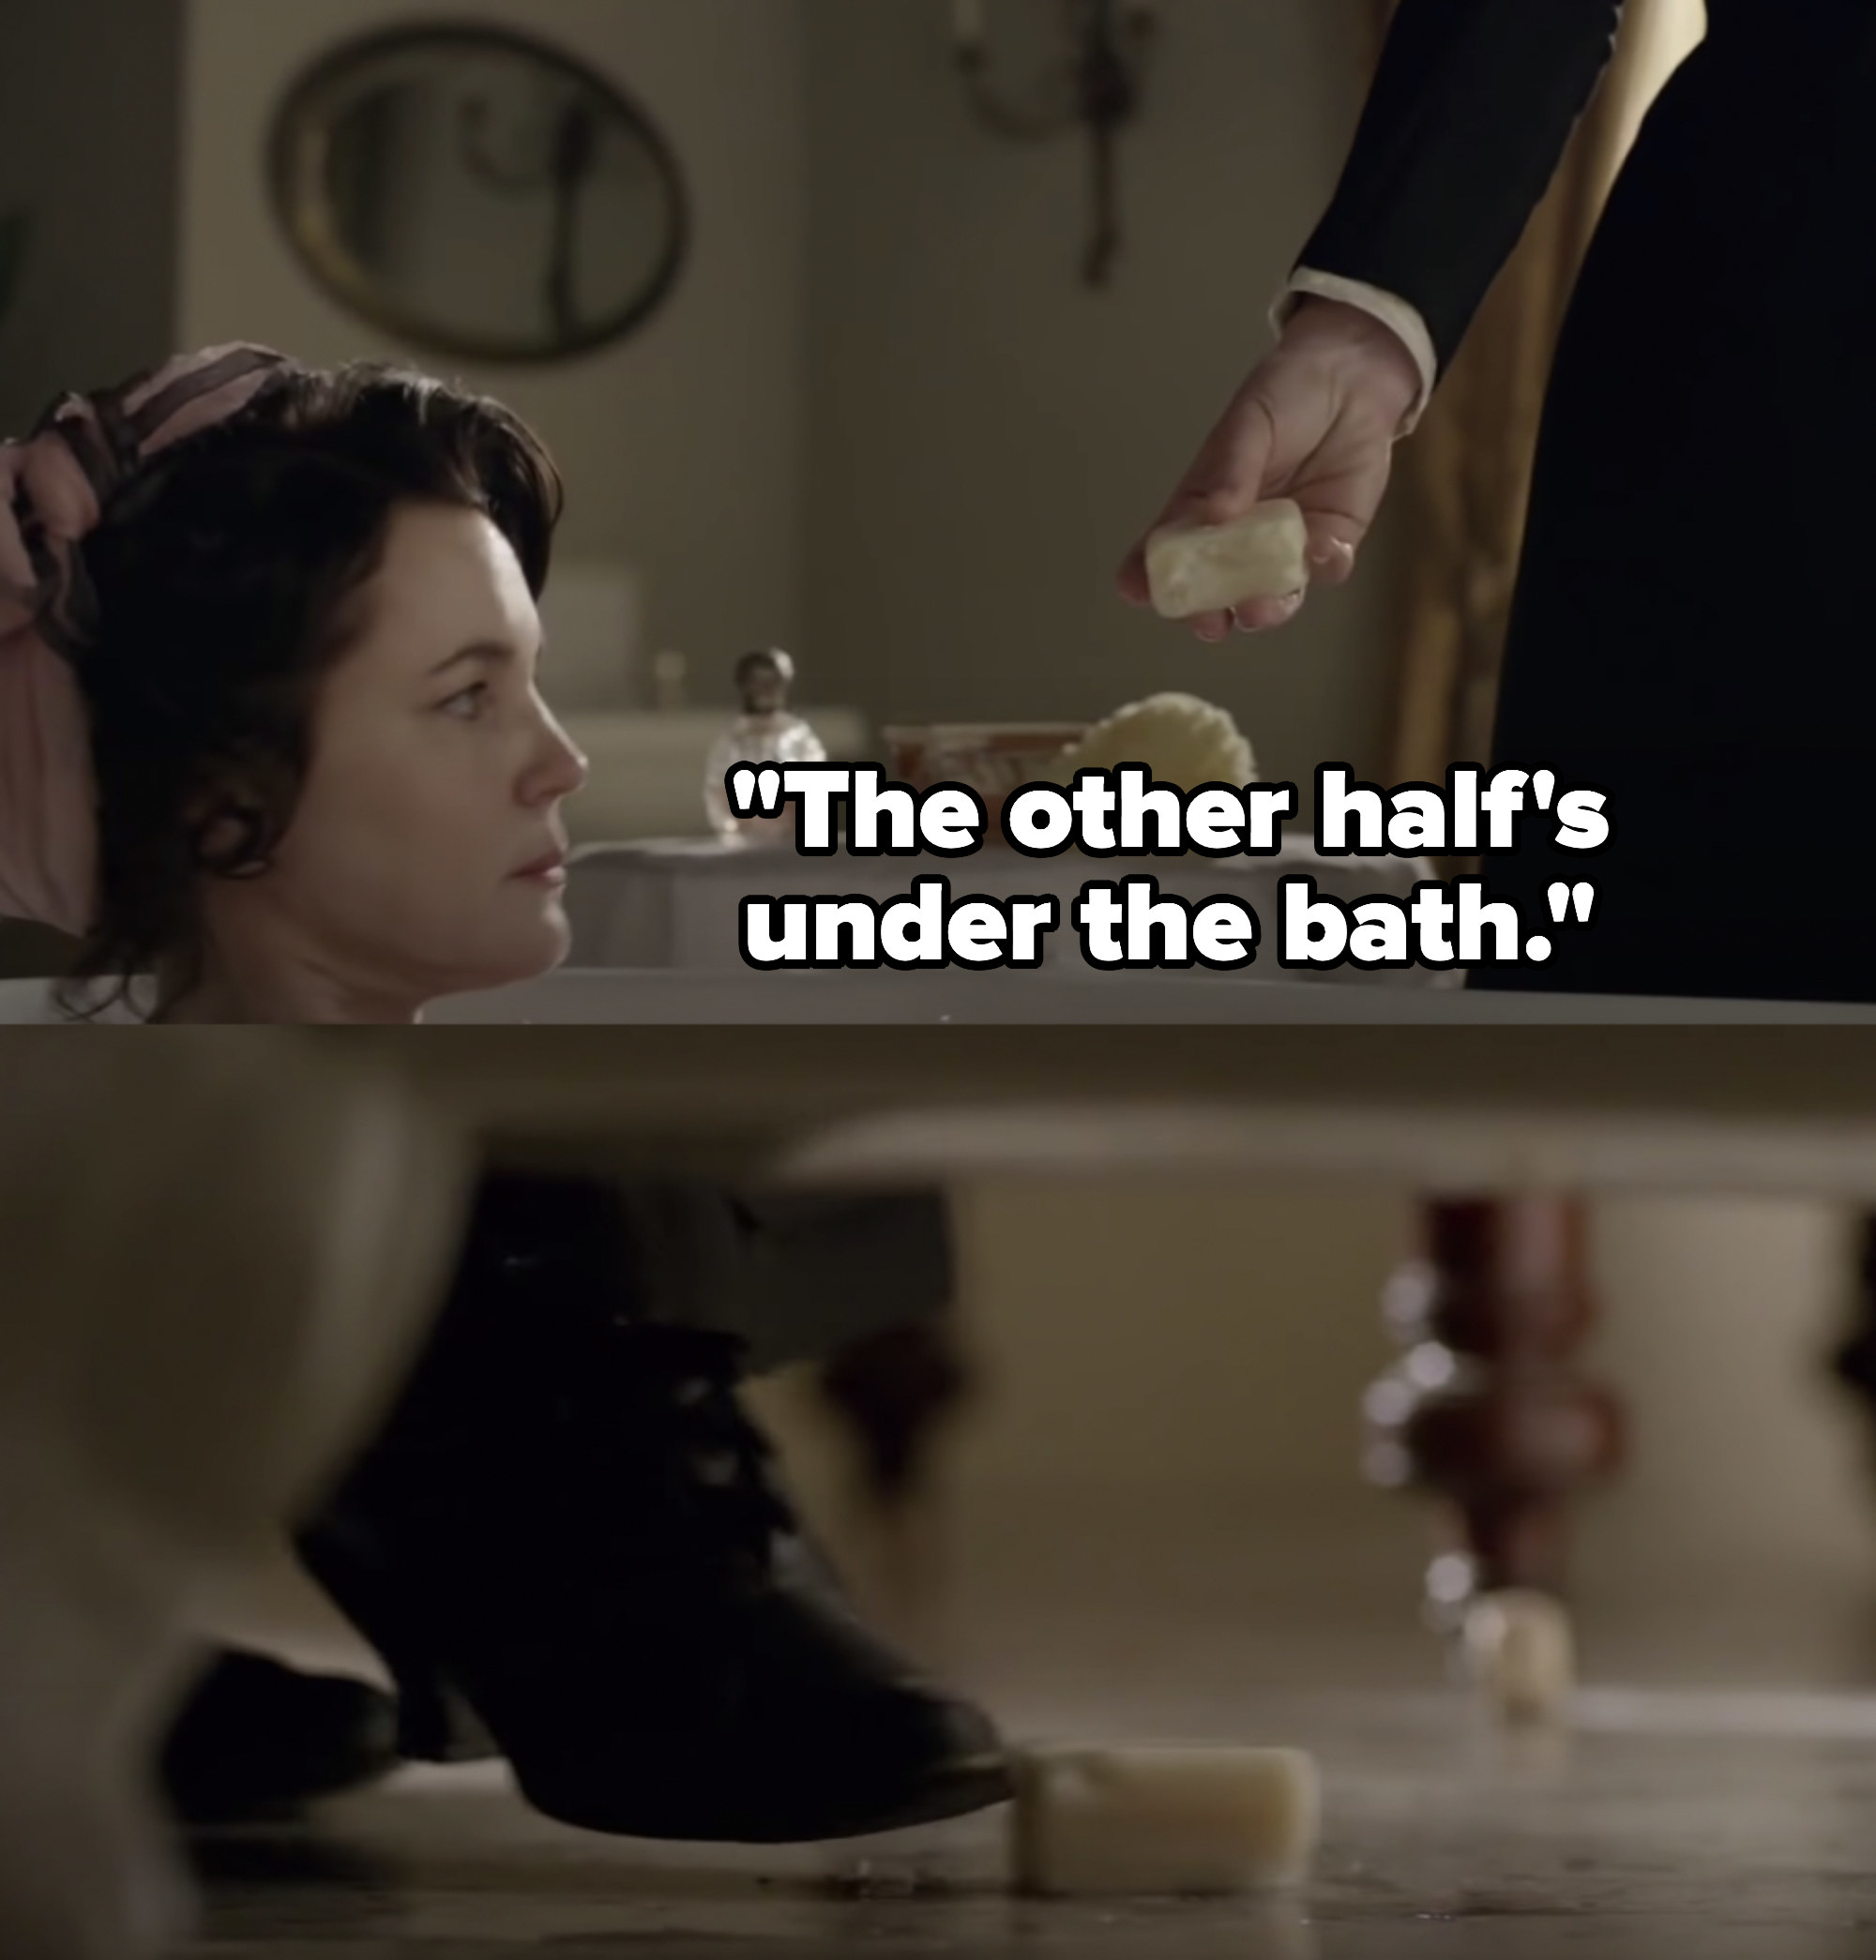 O&#x27;Brien says the other half of the soap is under the bath, then kicks the soap out from under the bath